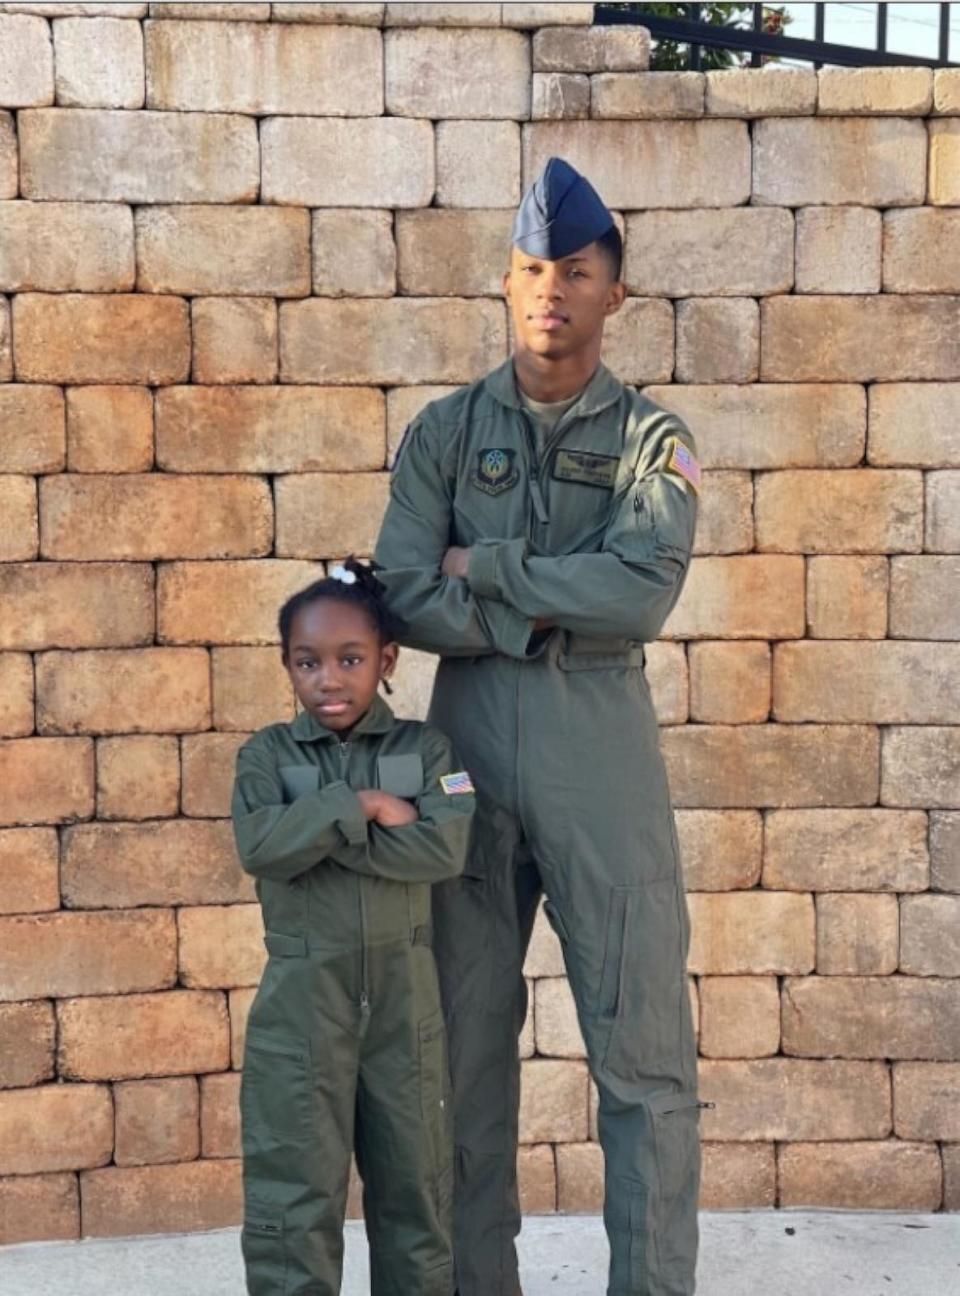 PHOTO: U.S. Air Force Senior Airman Roger Fortson posing for a picture with his little sister. (Ben Crump, Attorney)